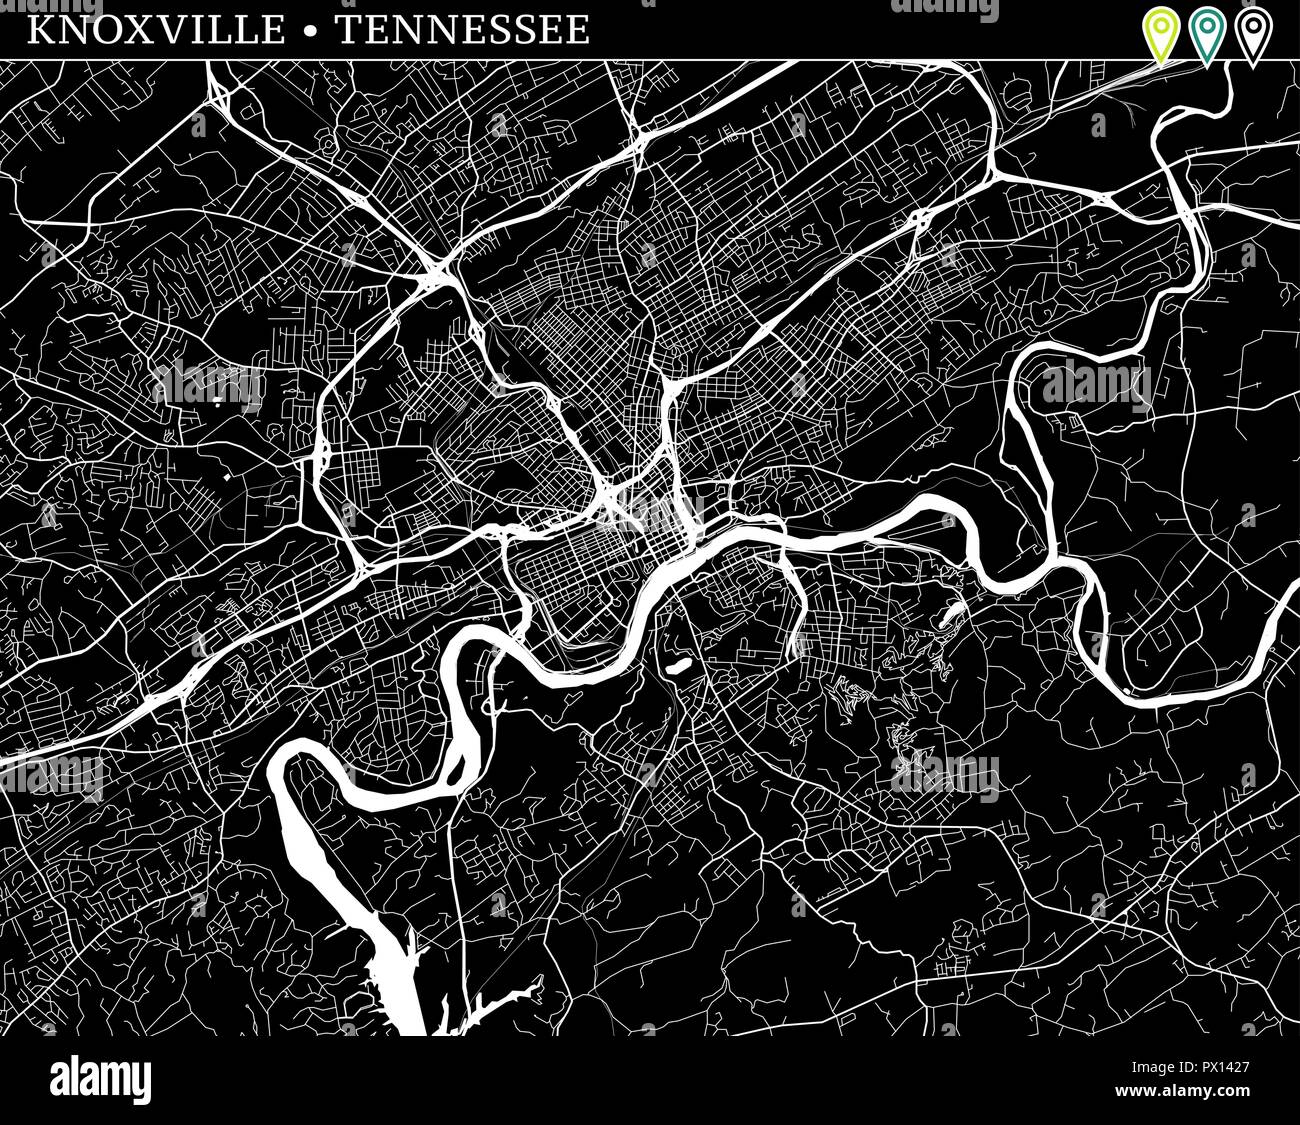 simple tennessee map